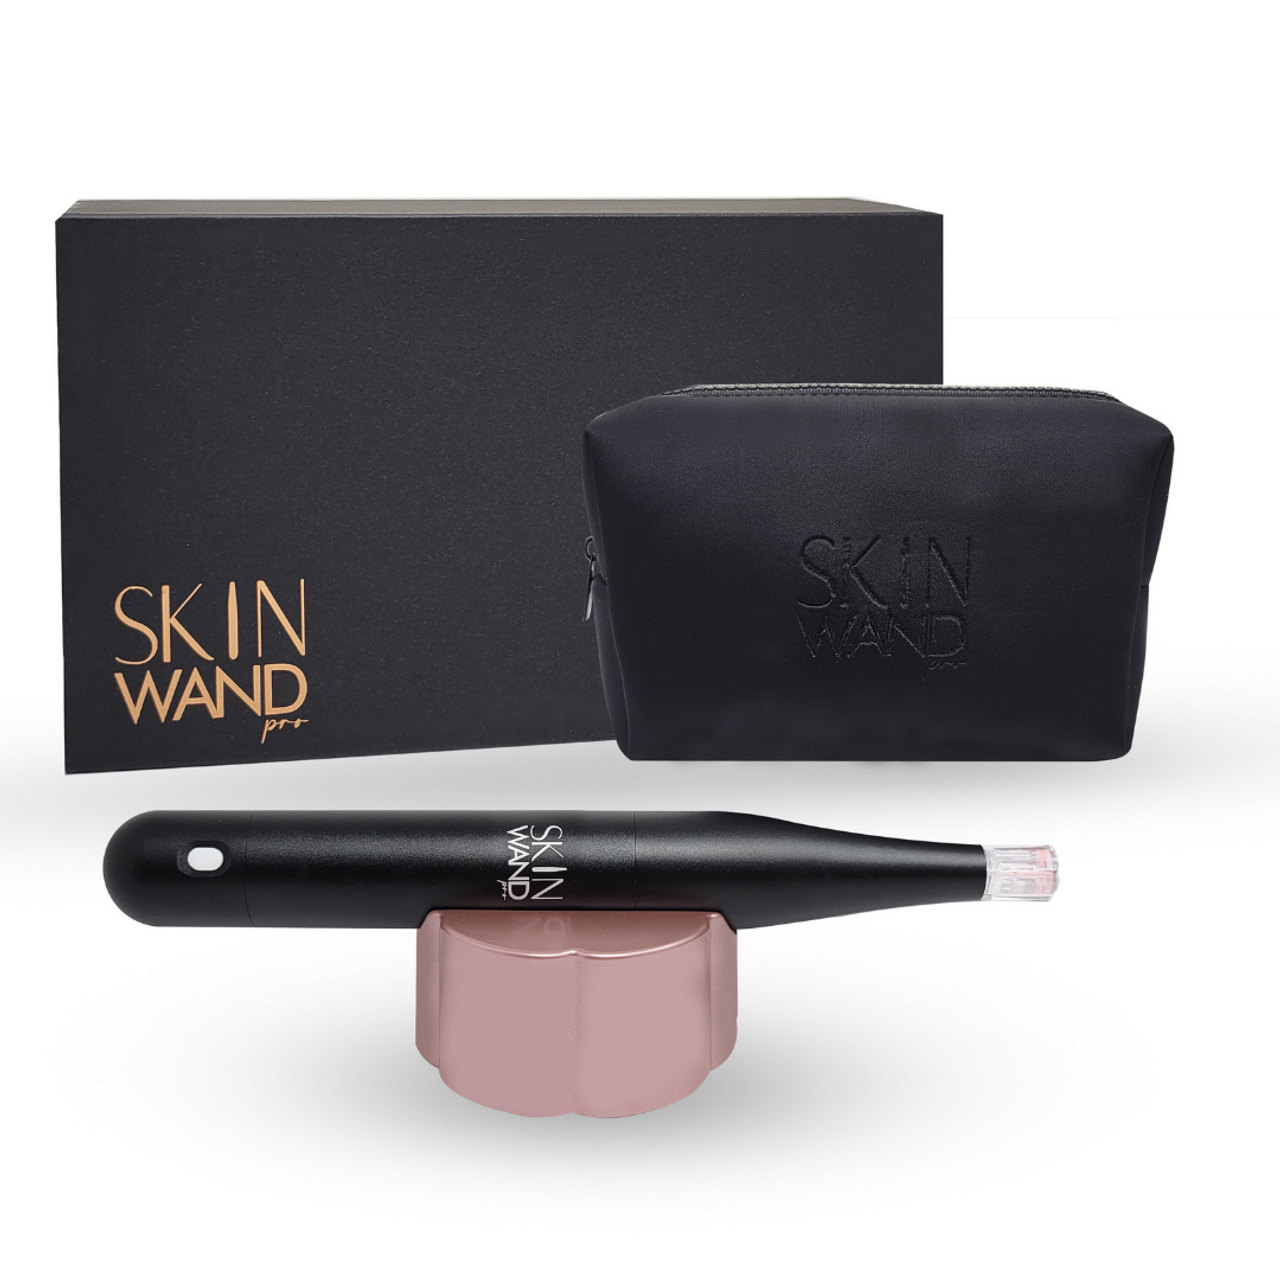 Skin Wand Pro with Carrying Case